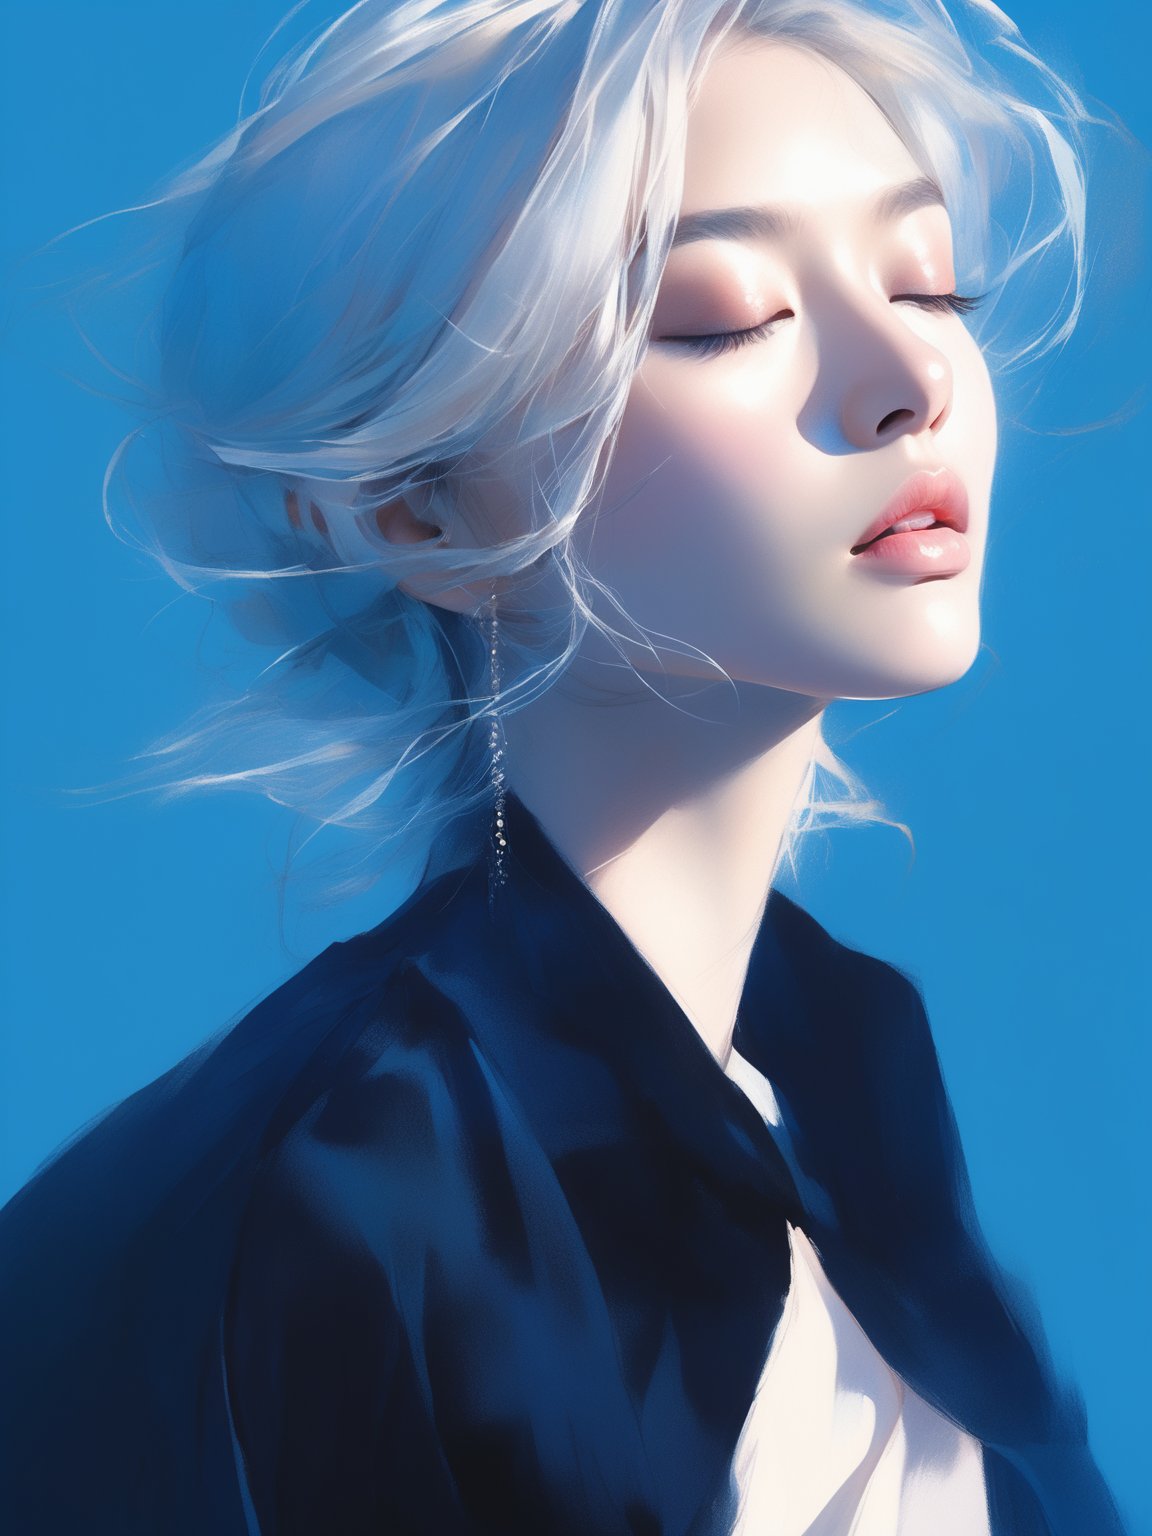 A striking portrait of beautiful Asian woman with ethereal, platinum hair, elegantly styled to frame her face. Her eyes are closed, and her lips are slightly parted, exuding a serene and contemplative expression. She is dressed in a sleek, dark blouse that contrasts beautifully with the vivid blue background, creating a sense of depth and focus on her delicate features. The overall ambiance is one of quiet elegance and otherworldly beauty, enhanced by the soft, natural light that bathes her face and accentuates the flawless texture of her skin. The image captures a moment of calm and introspection, as if she is lost in a peaceful dream.